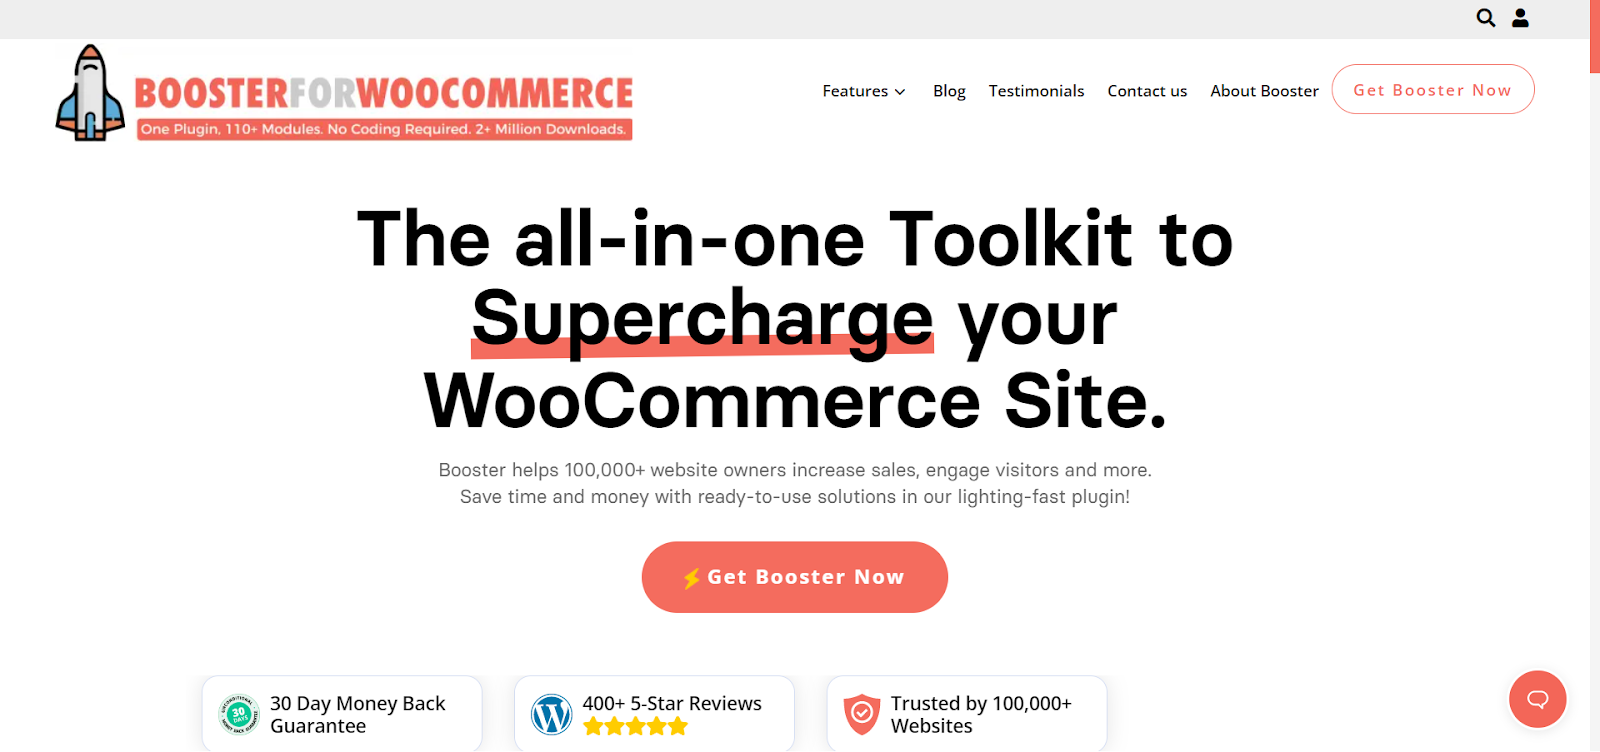 What is Booster for WooCommerce?